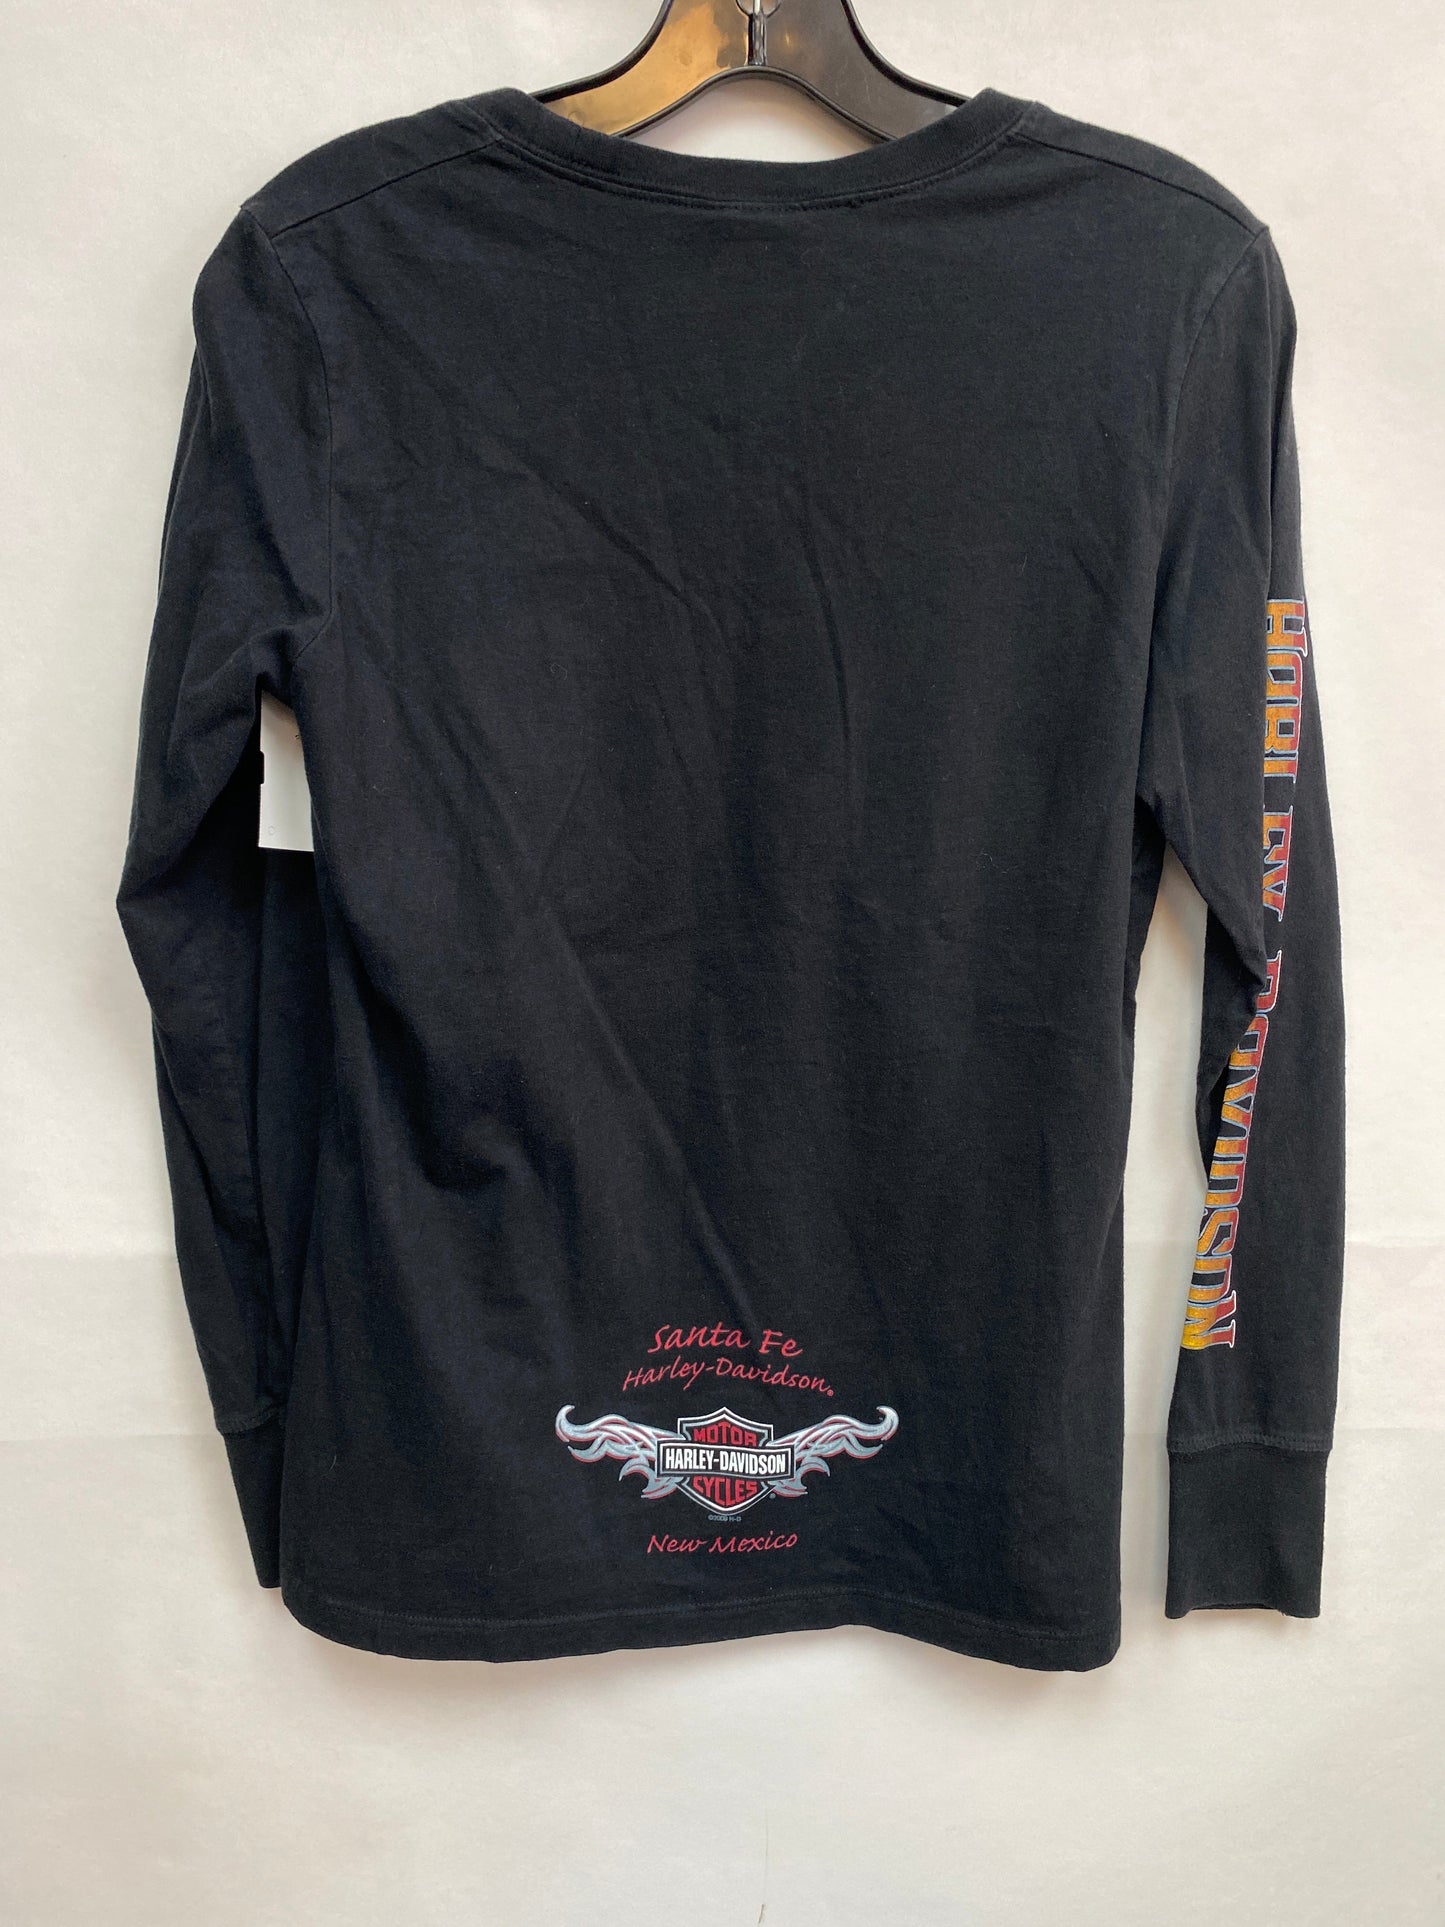 Top Long Sleeve By Harley Davidson  Size: M